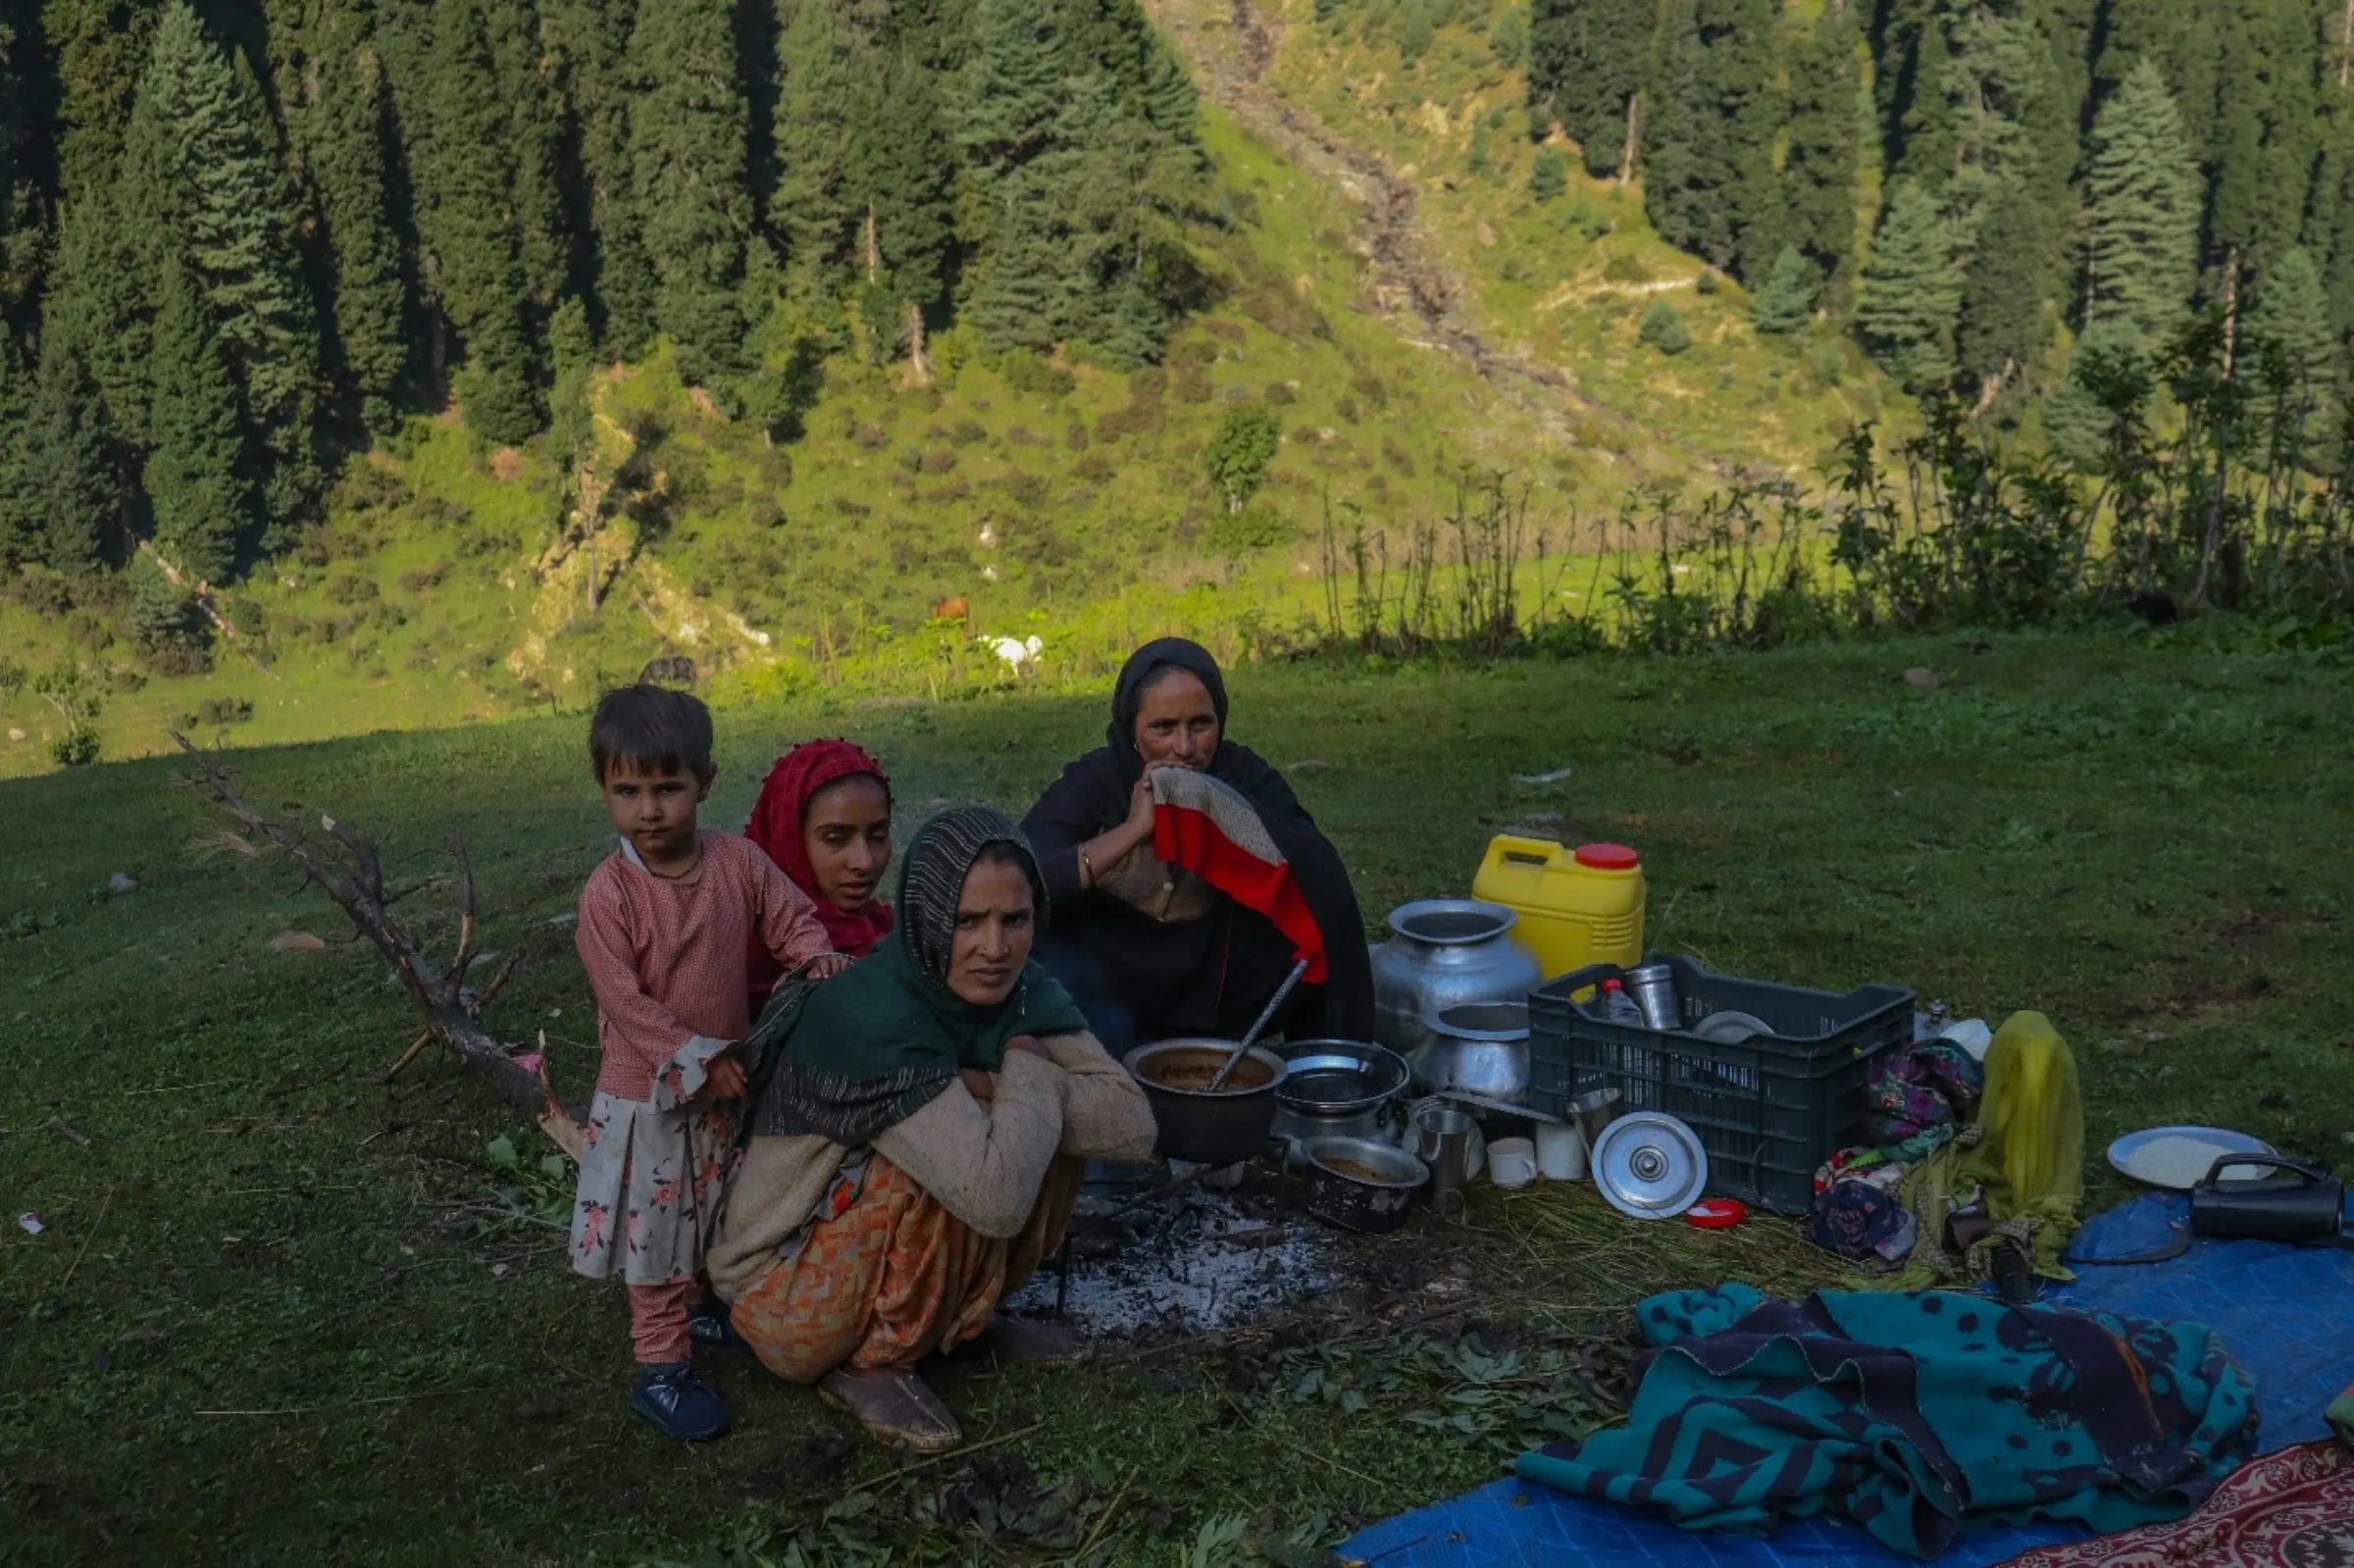 Ruksana (front), a member of the Gujjar nomadic community, lost a baby when heavy rain and strong winds made it difficult to get to the nearest hospital when she went into early labour, in Aru Valley, Jammu and Kashmir, India, Sept. 14, 2022